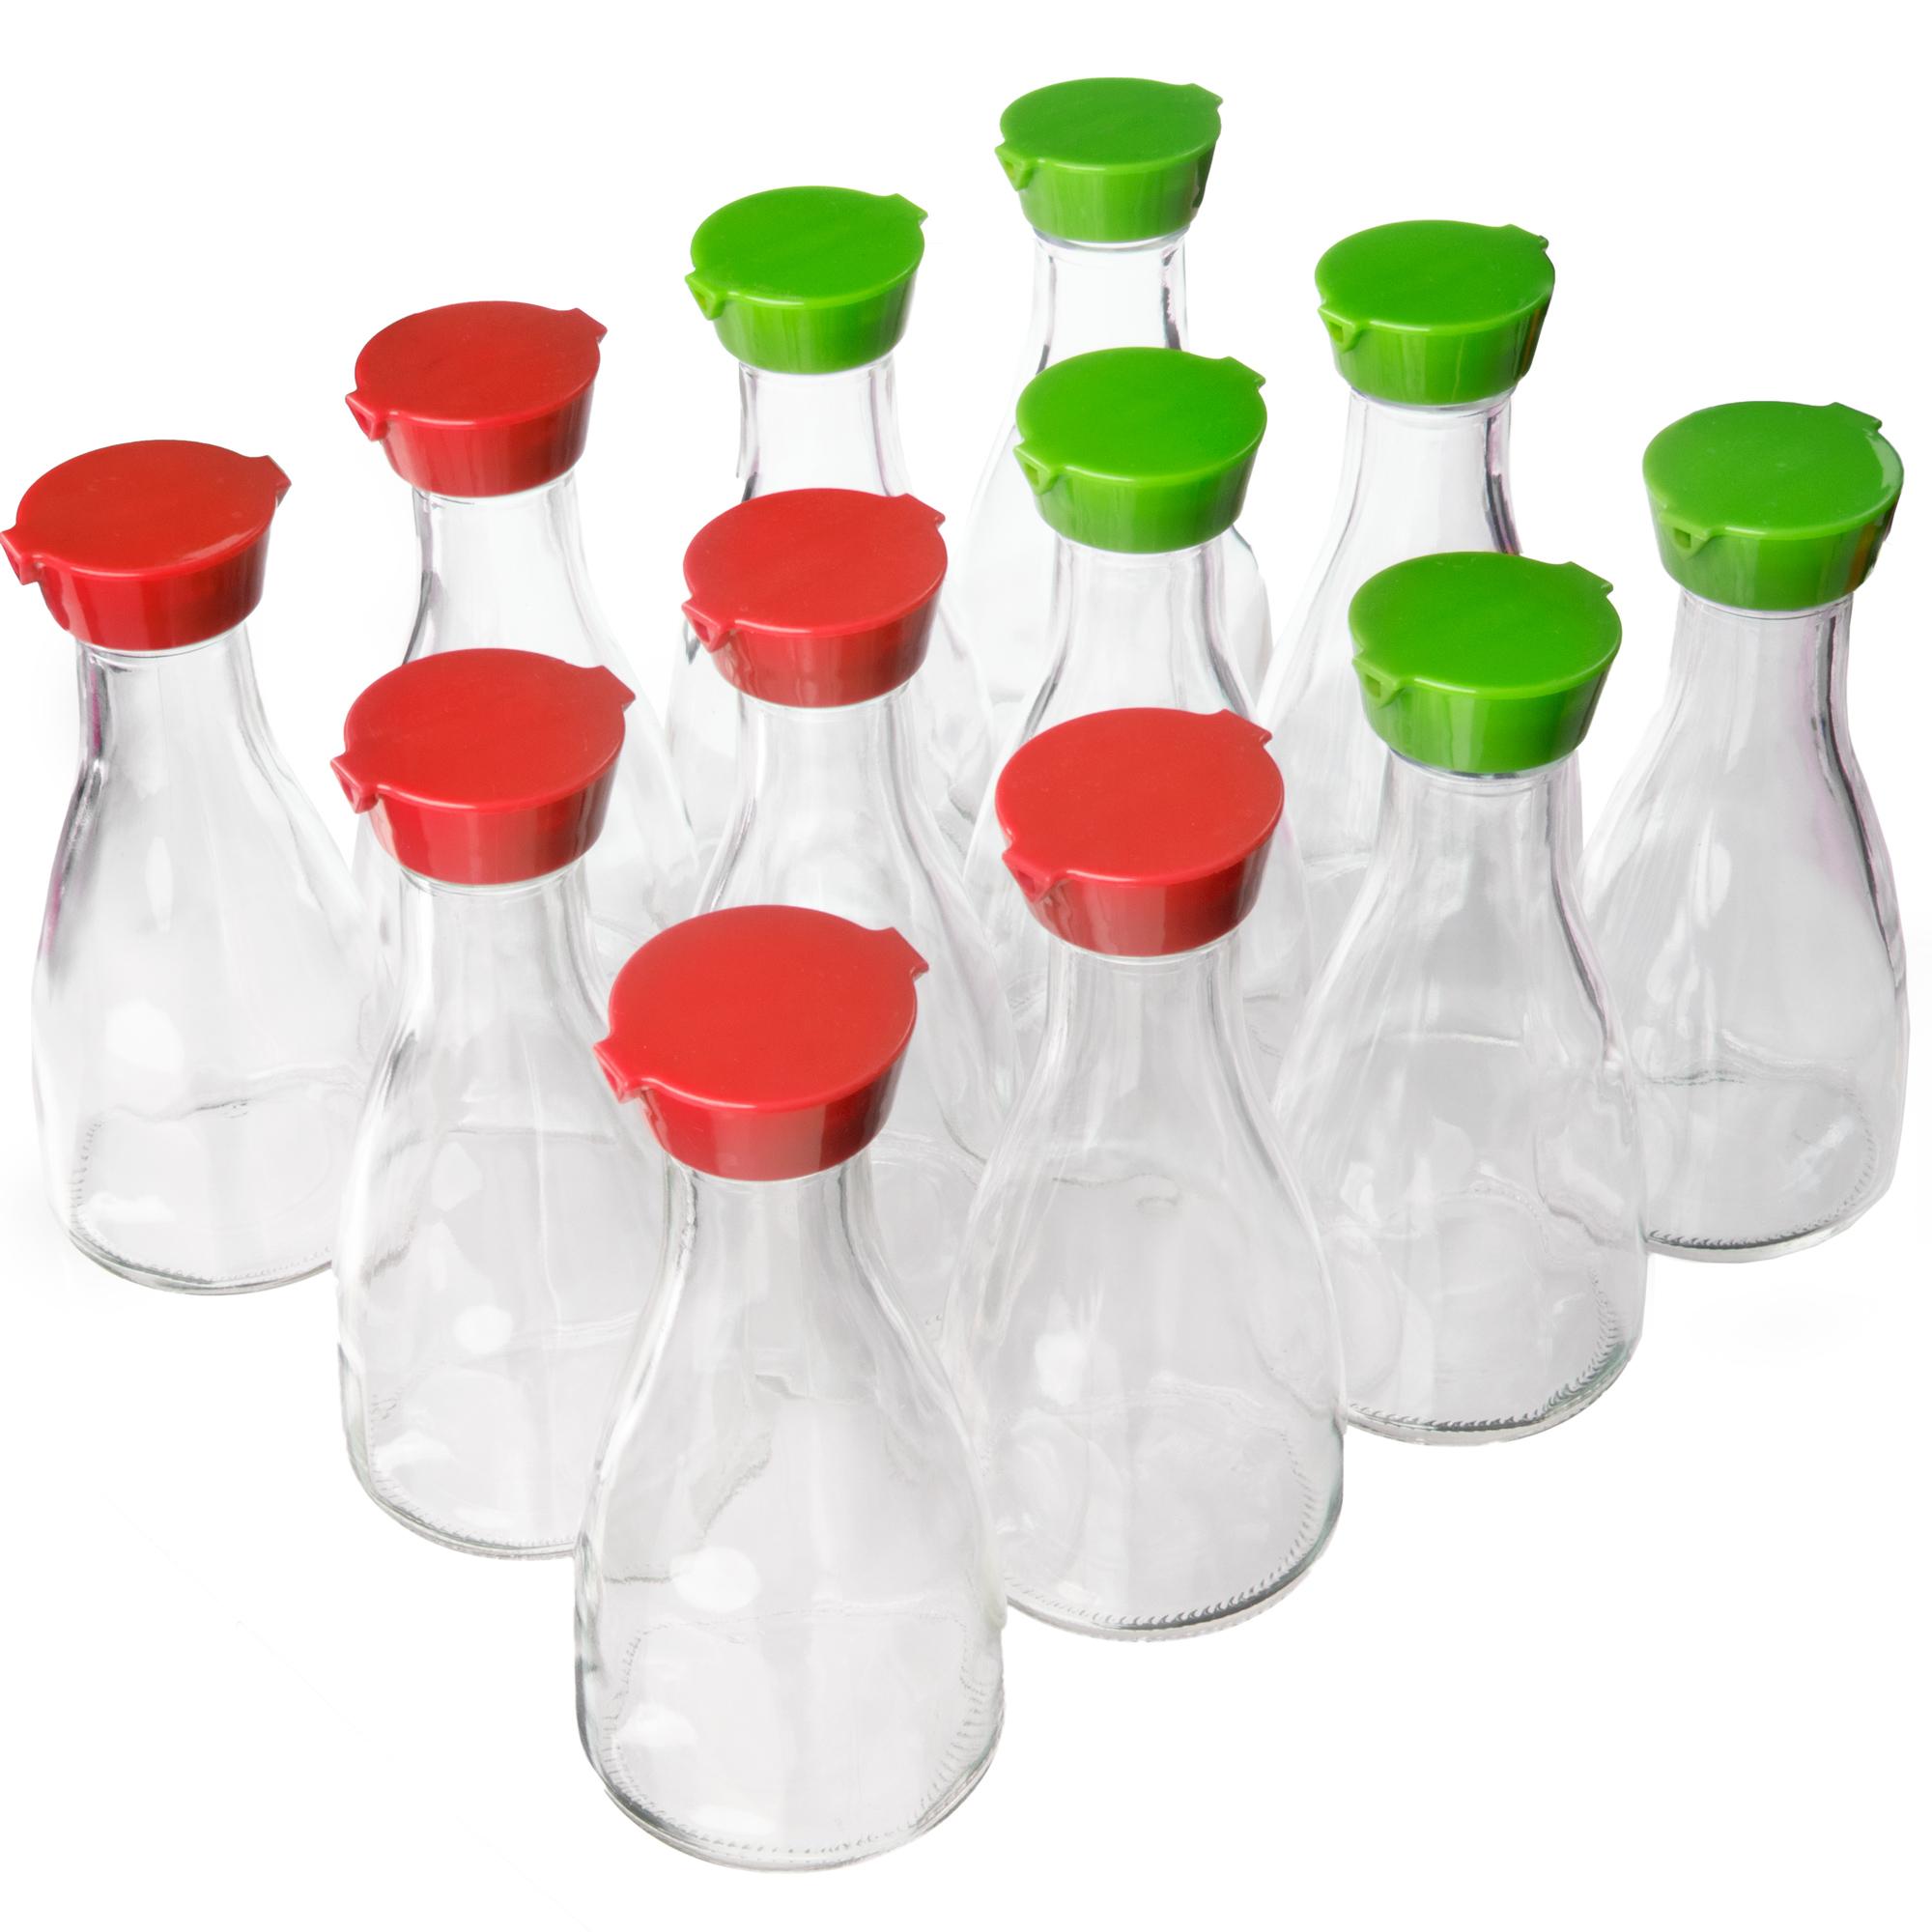 Soy Sauce Bottle 12-pack Red/Green